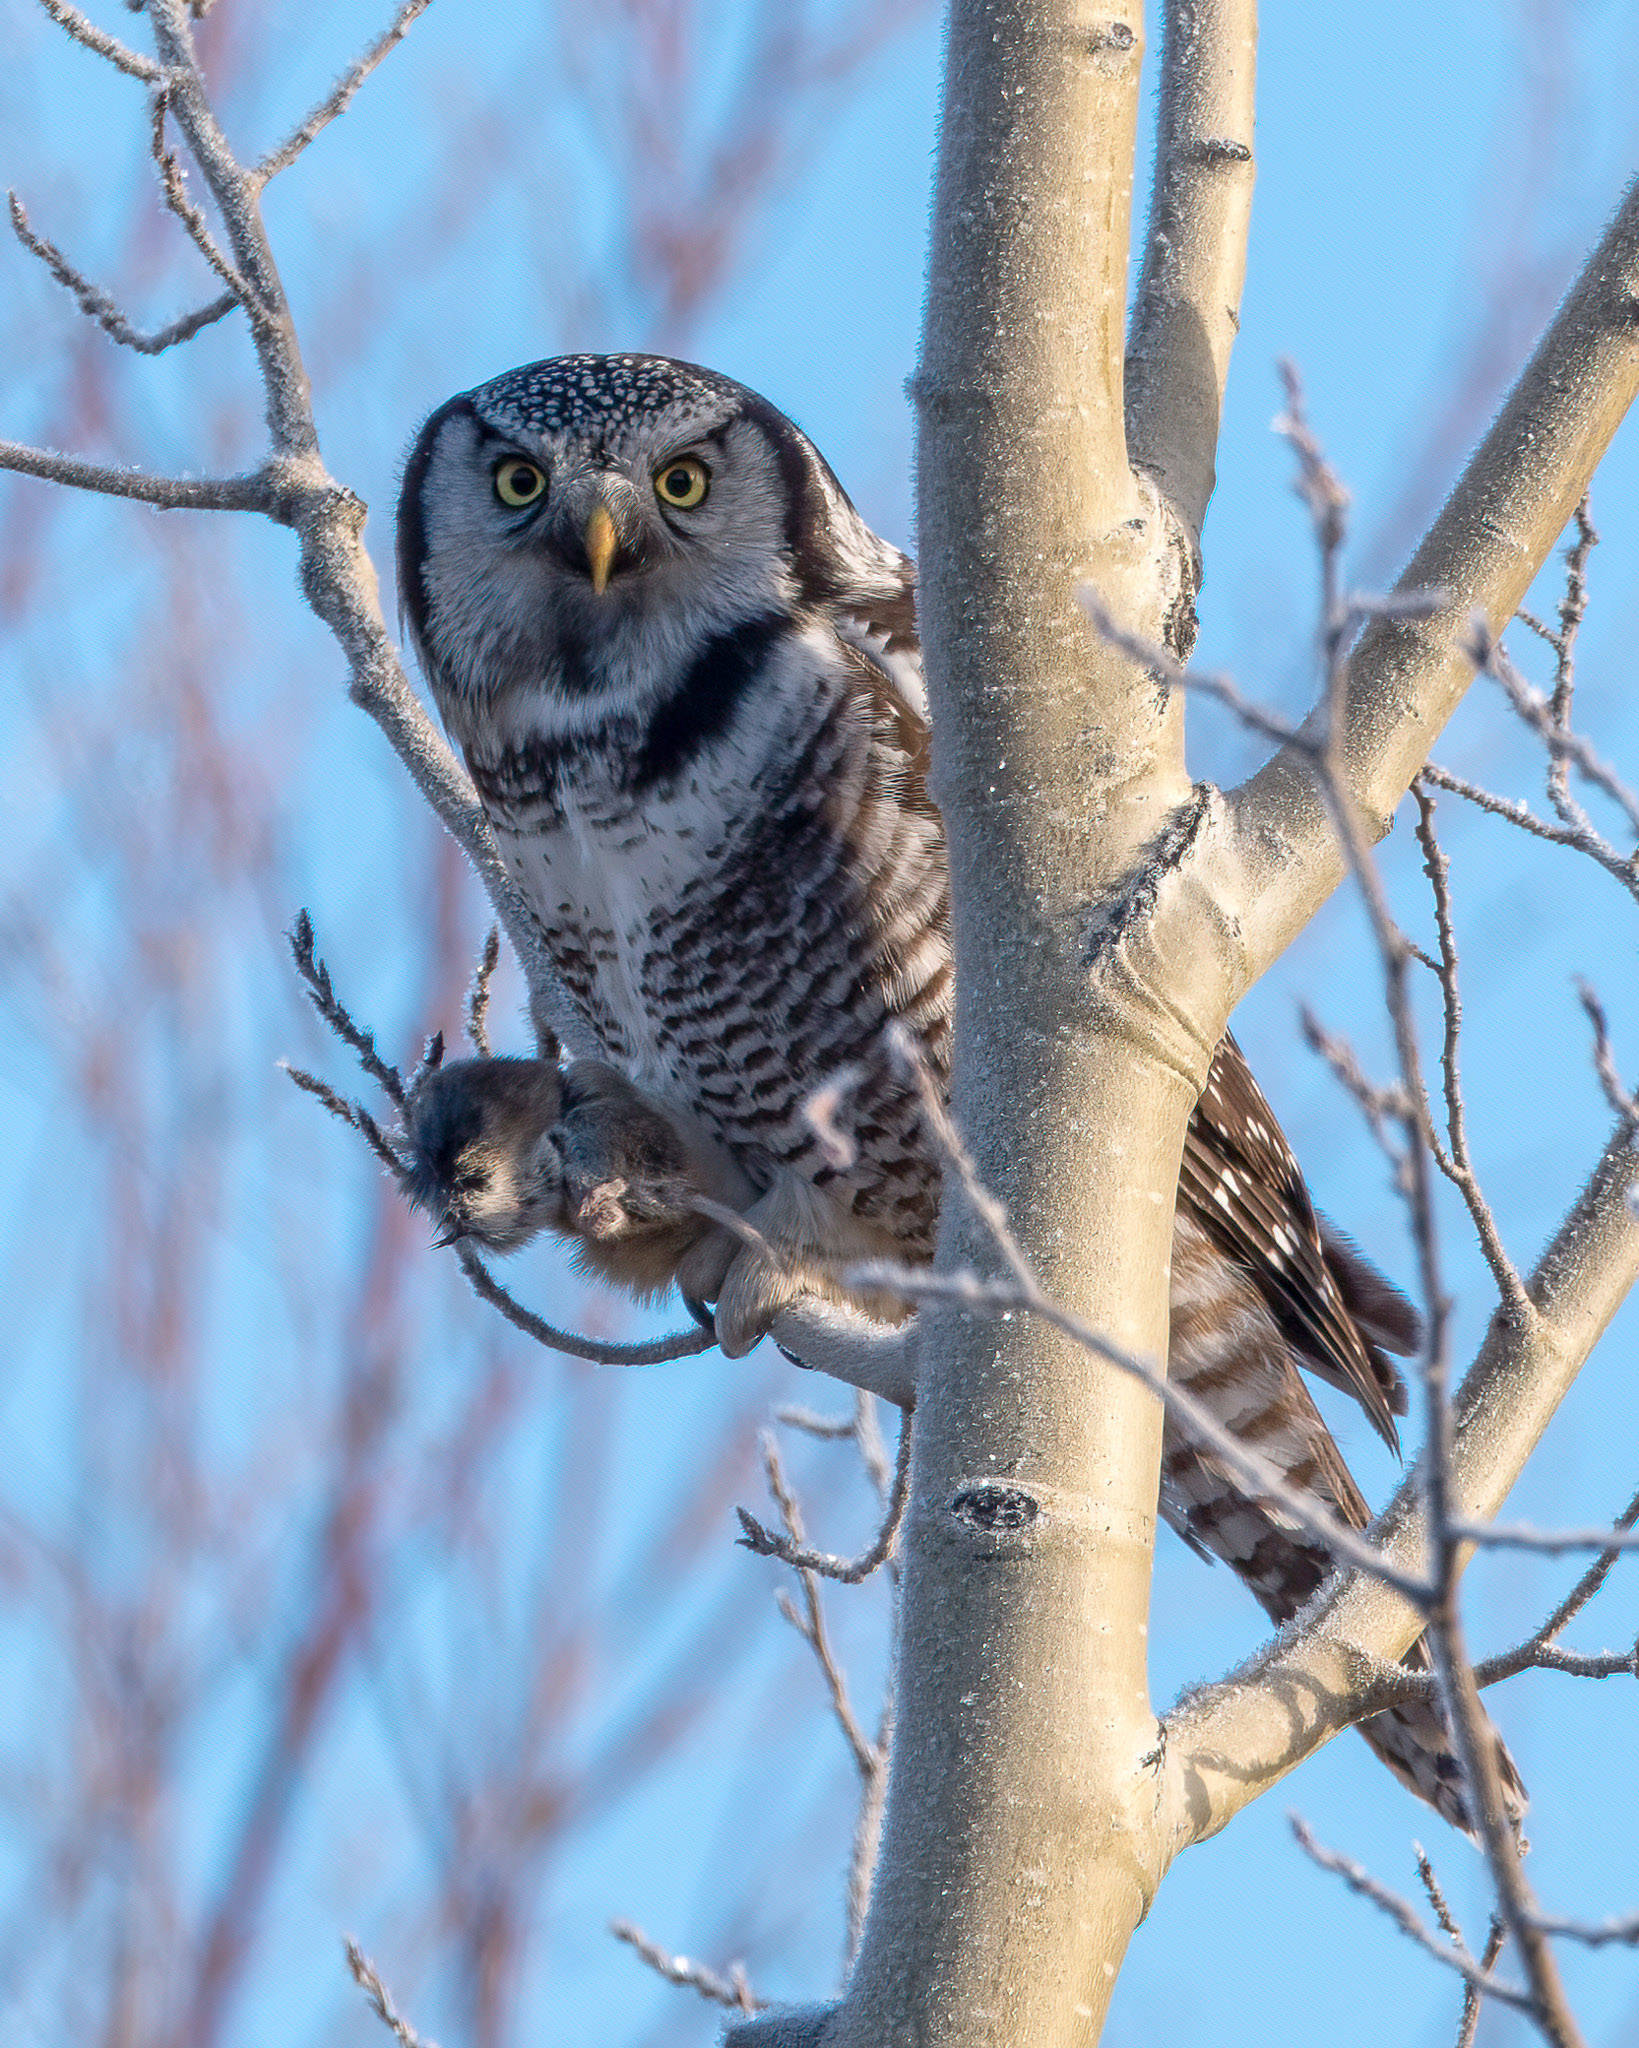 A Northern Hawk Owl clutching a red-backed vole near Watson Lake between Sterling and Cooper Landing, Alaska on Nov. 30, 2020. (Photo by Colin Canterbury/USFWS)